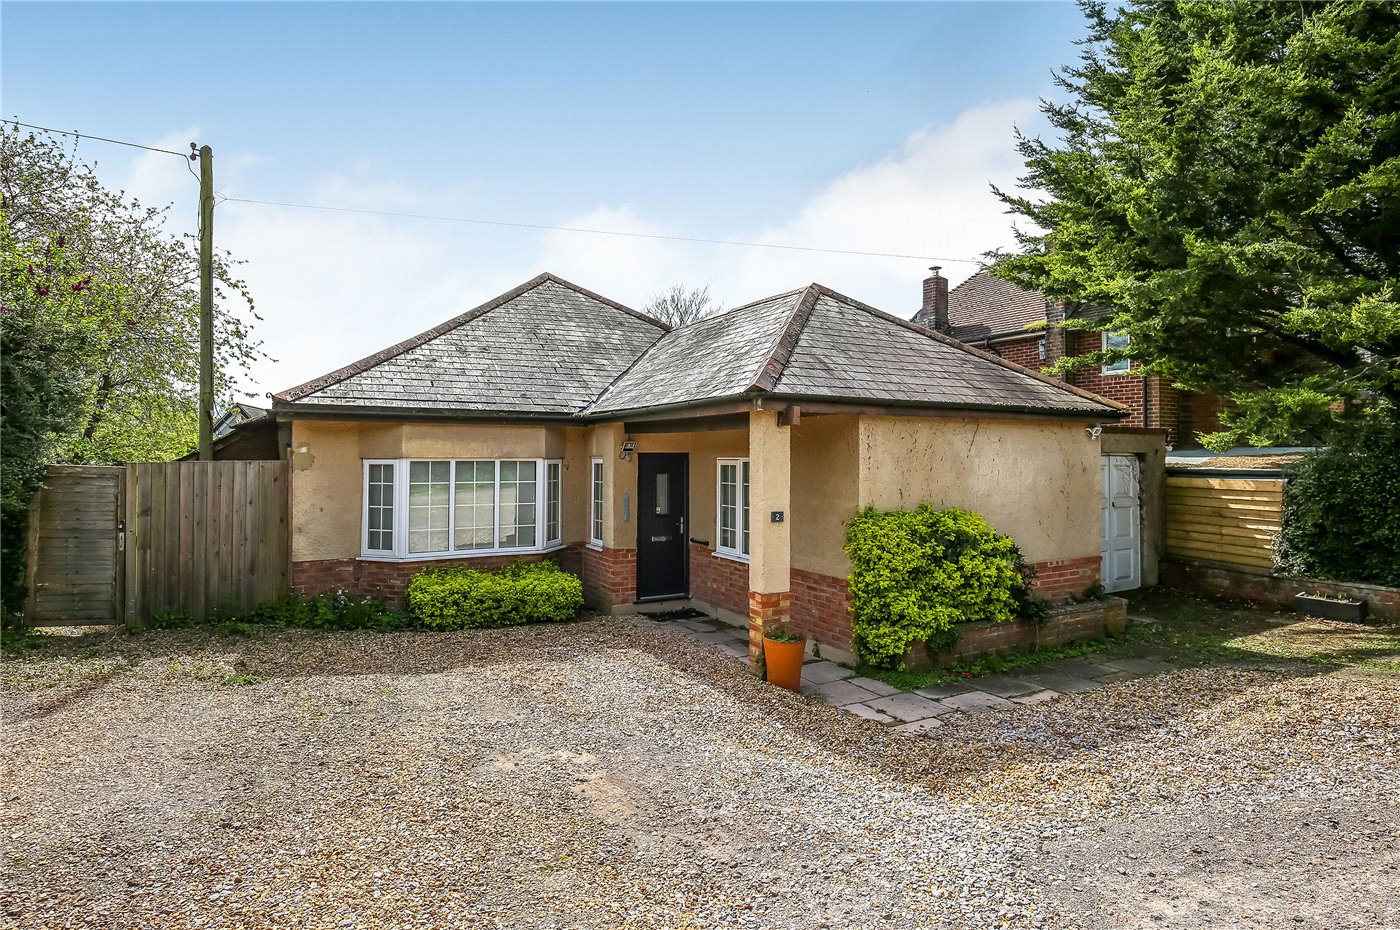 Westman Road, Winchester, Winchester, Hampshire, SO22 3 bedroom bungalow in Winchester